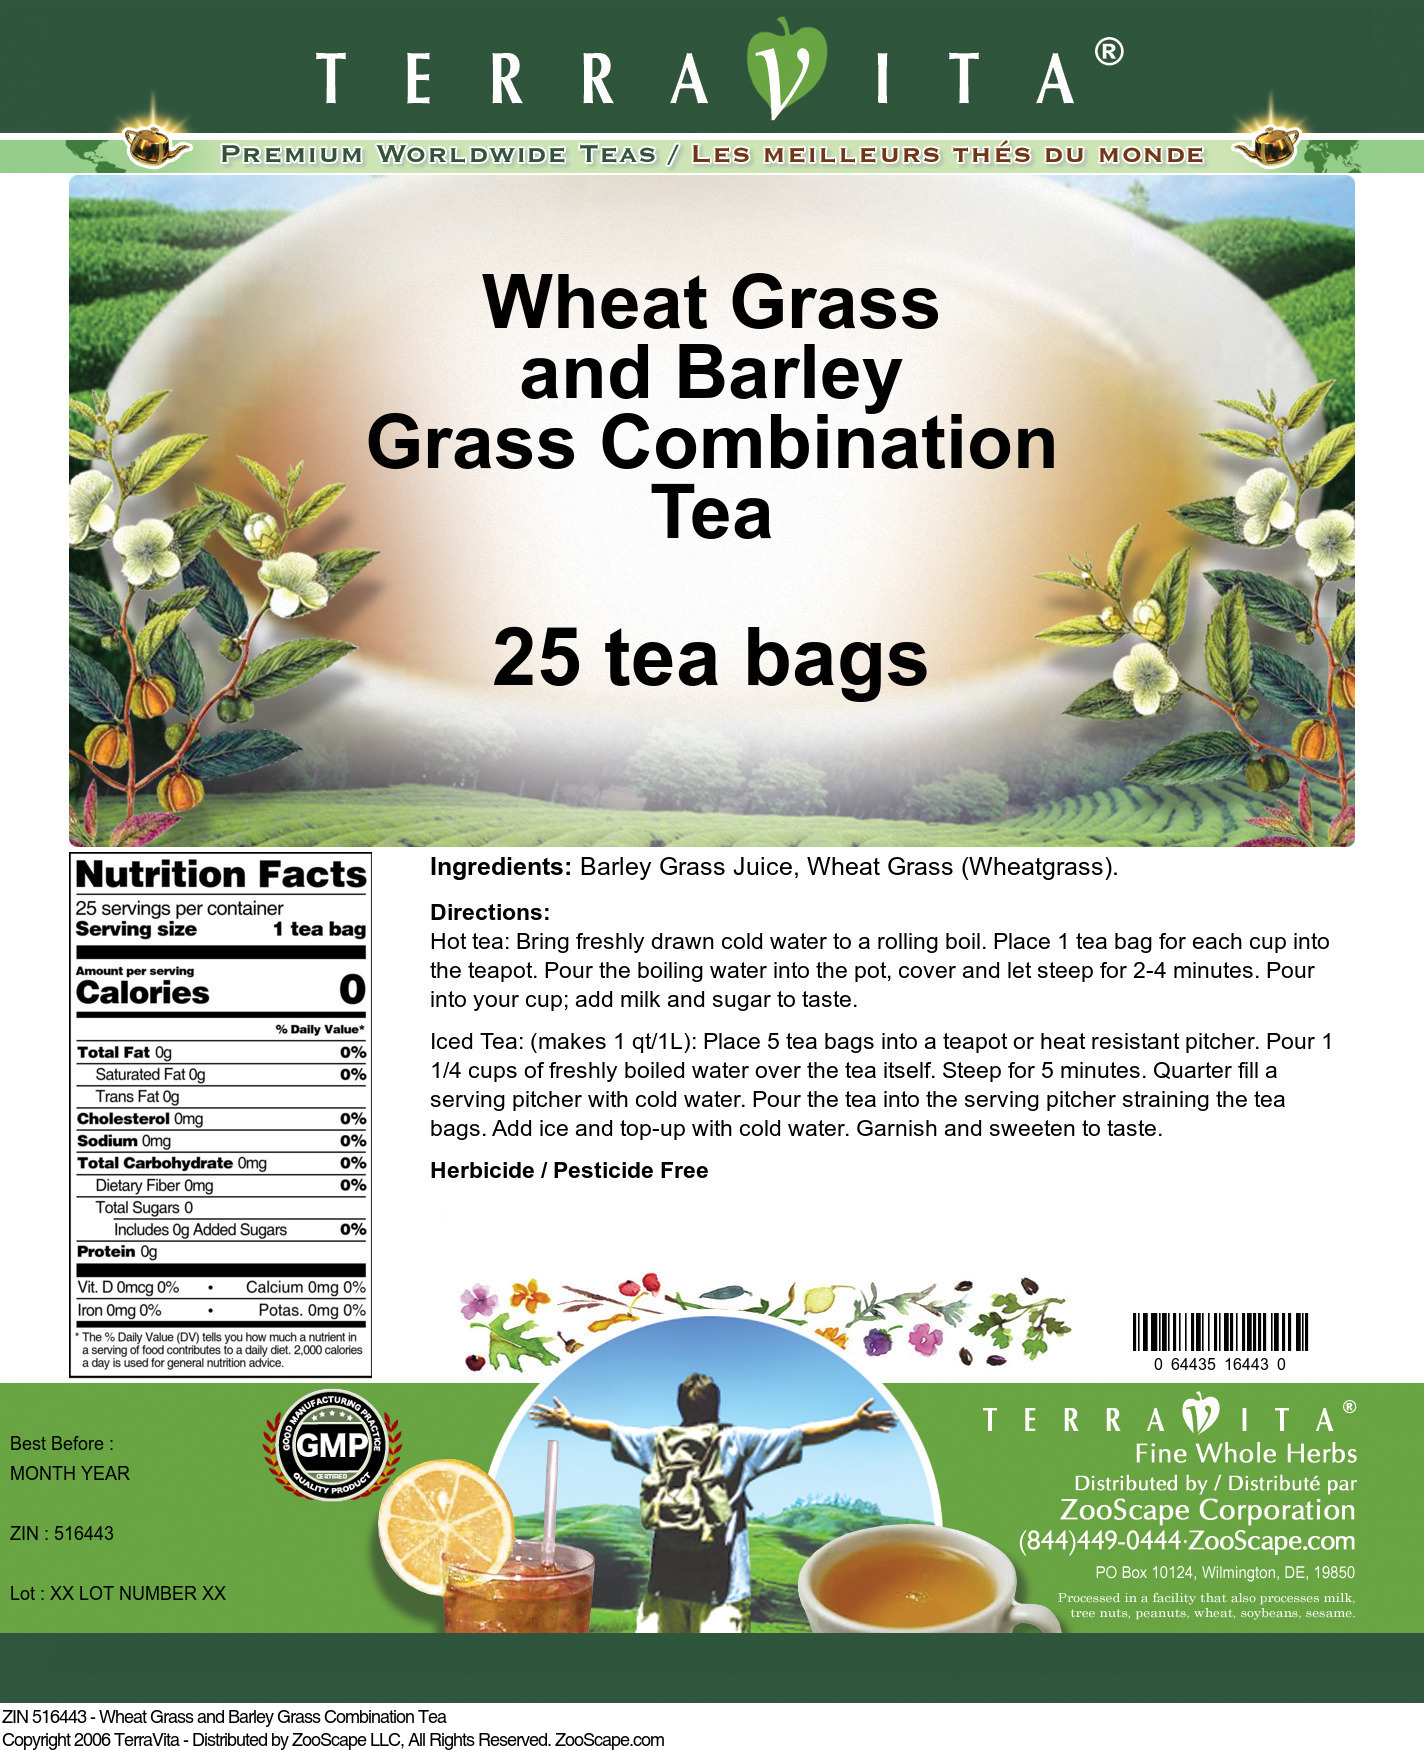 Wheat Grass and Barley Grass Combination Tea - Label